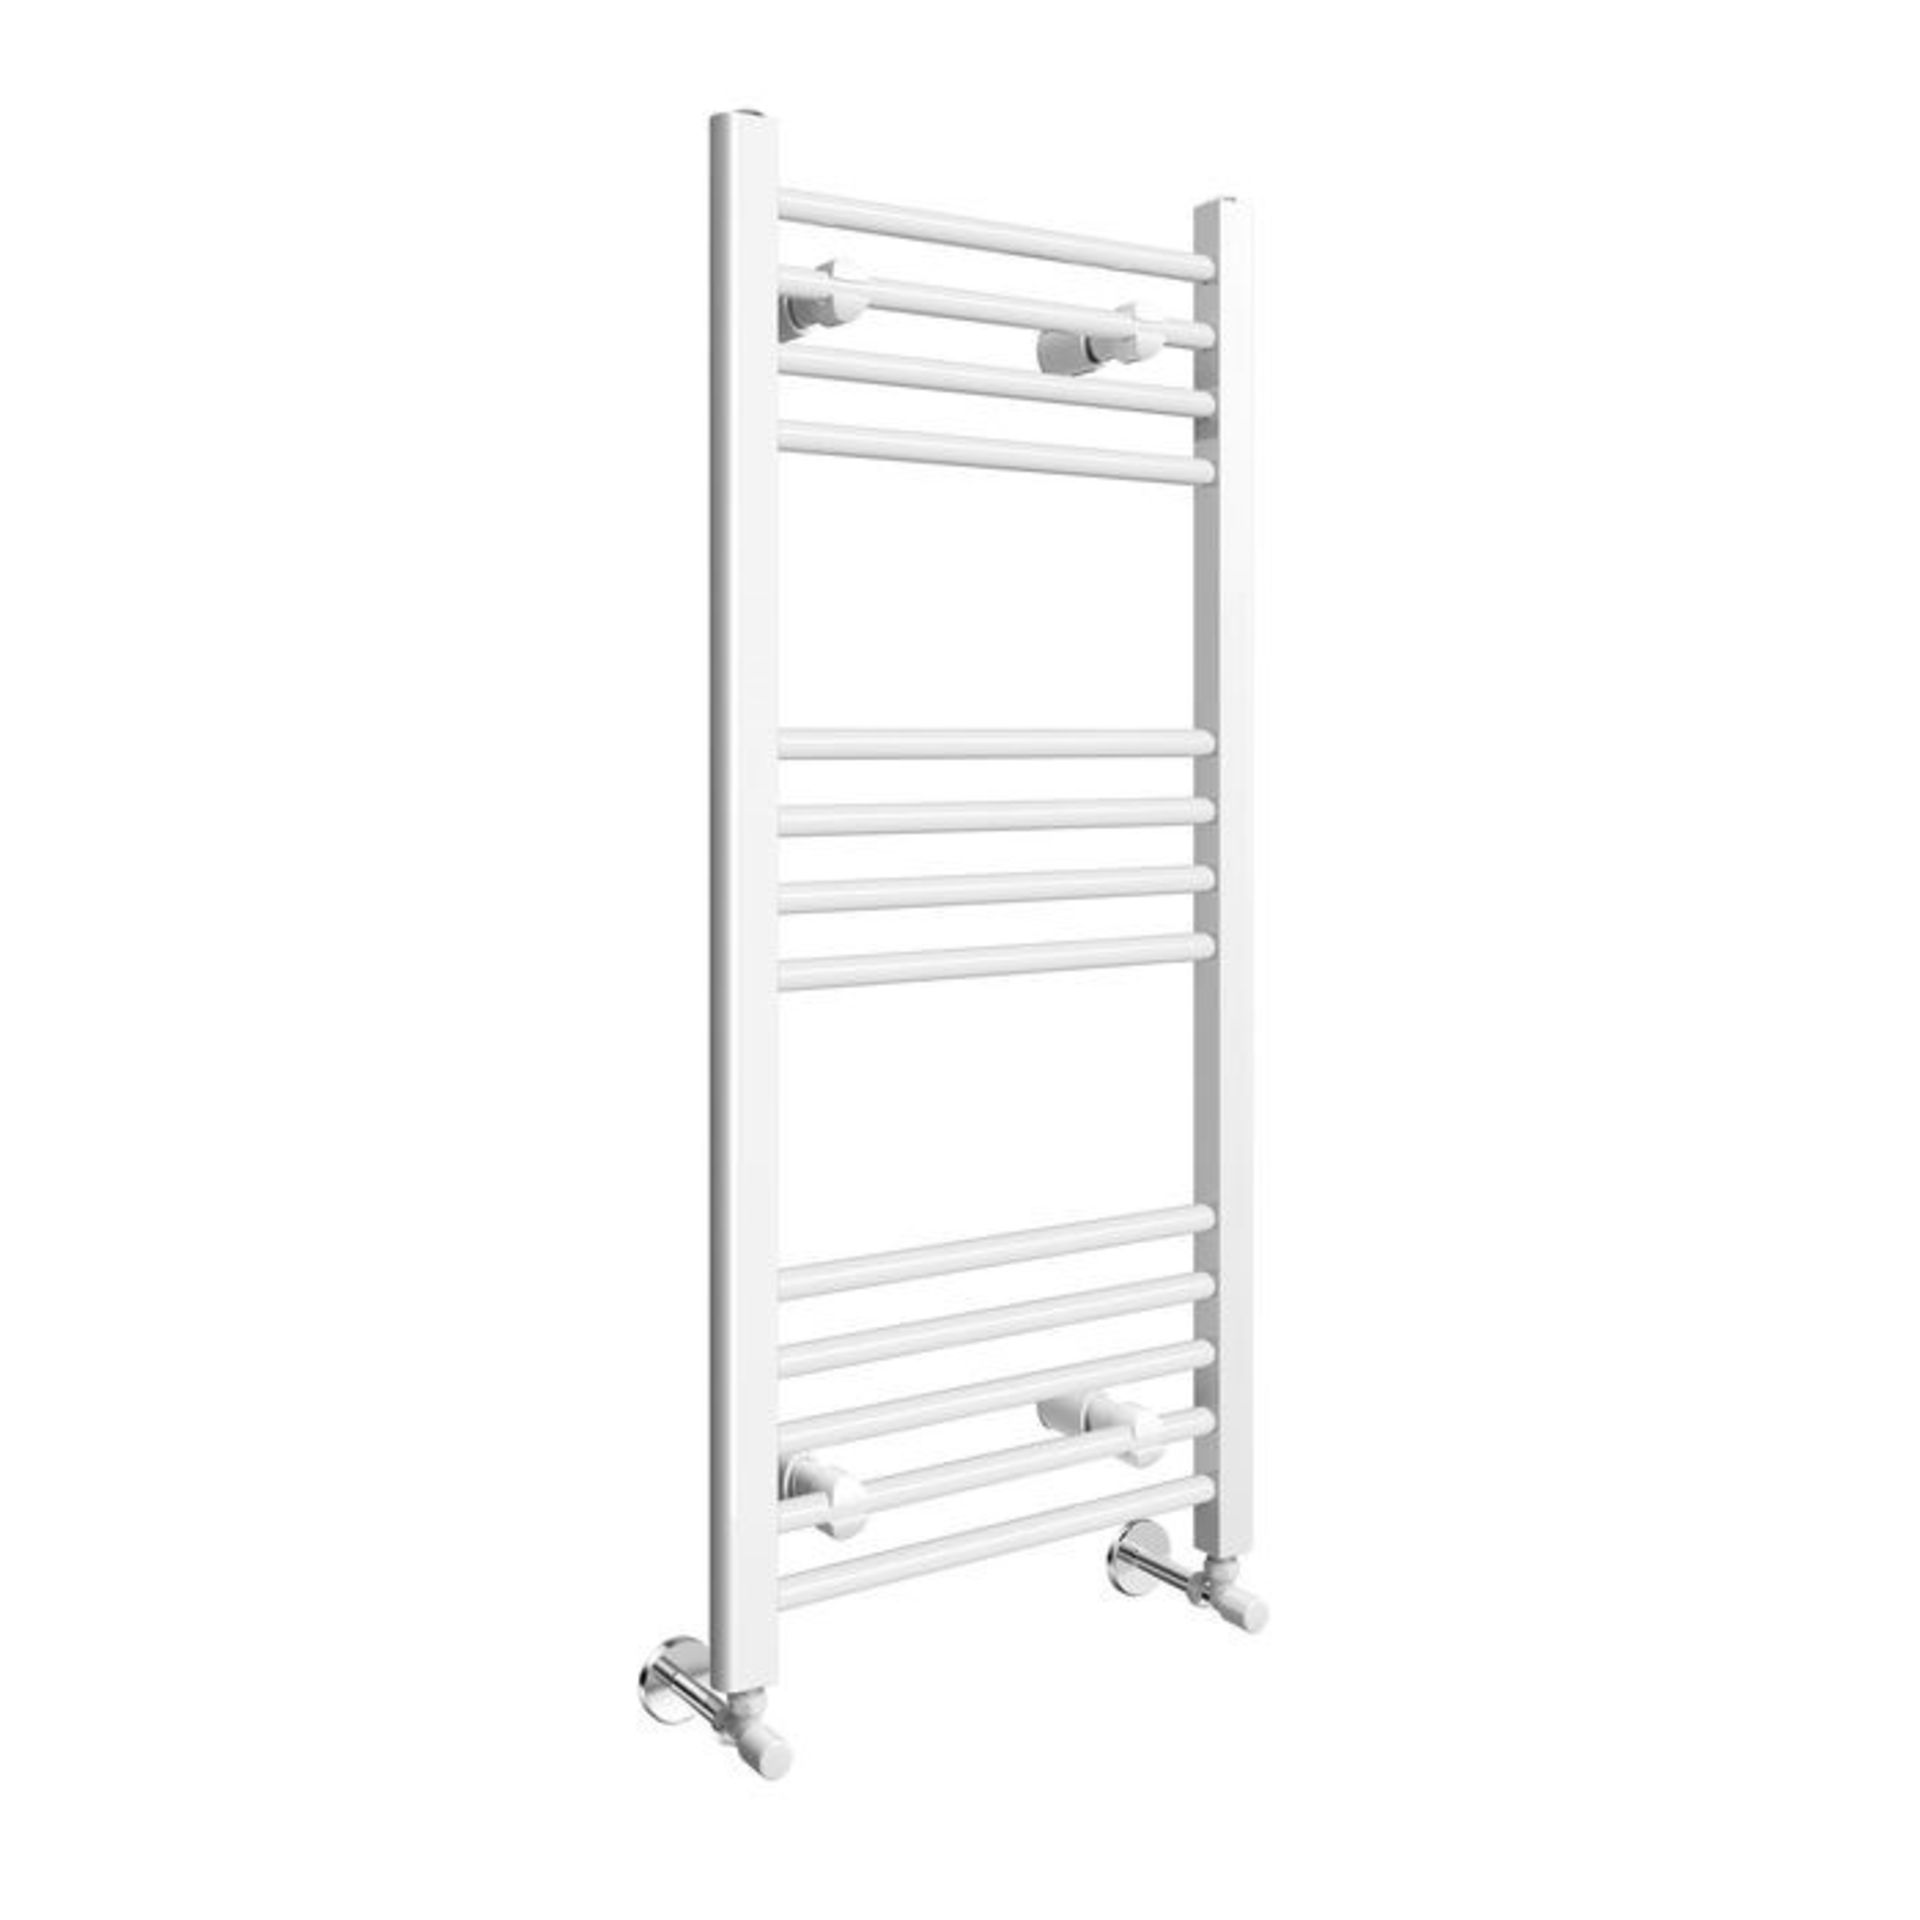 (VD161) 1100x500mm White Basic Towel radiator High gloss White.RRP £165.99.Made from low-carbo... - Image 3 of 3